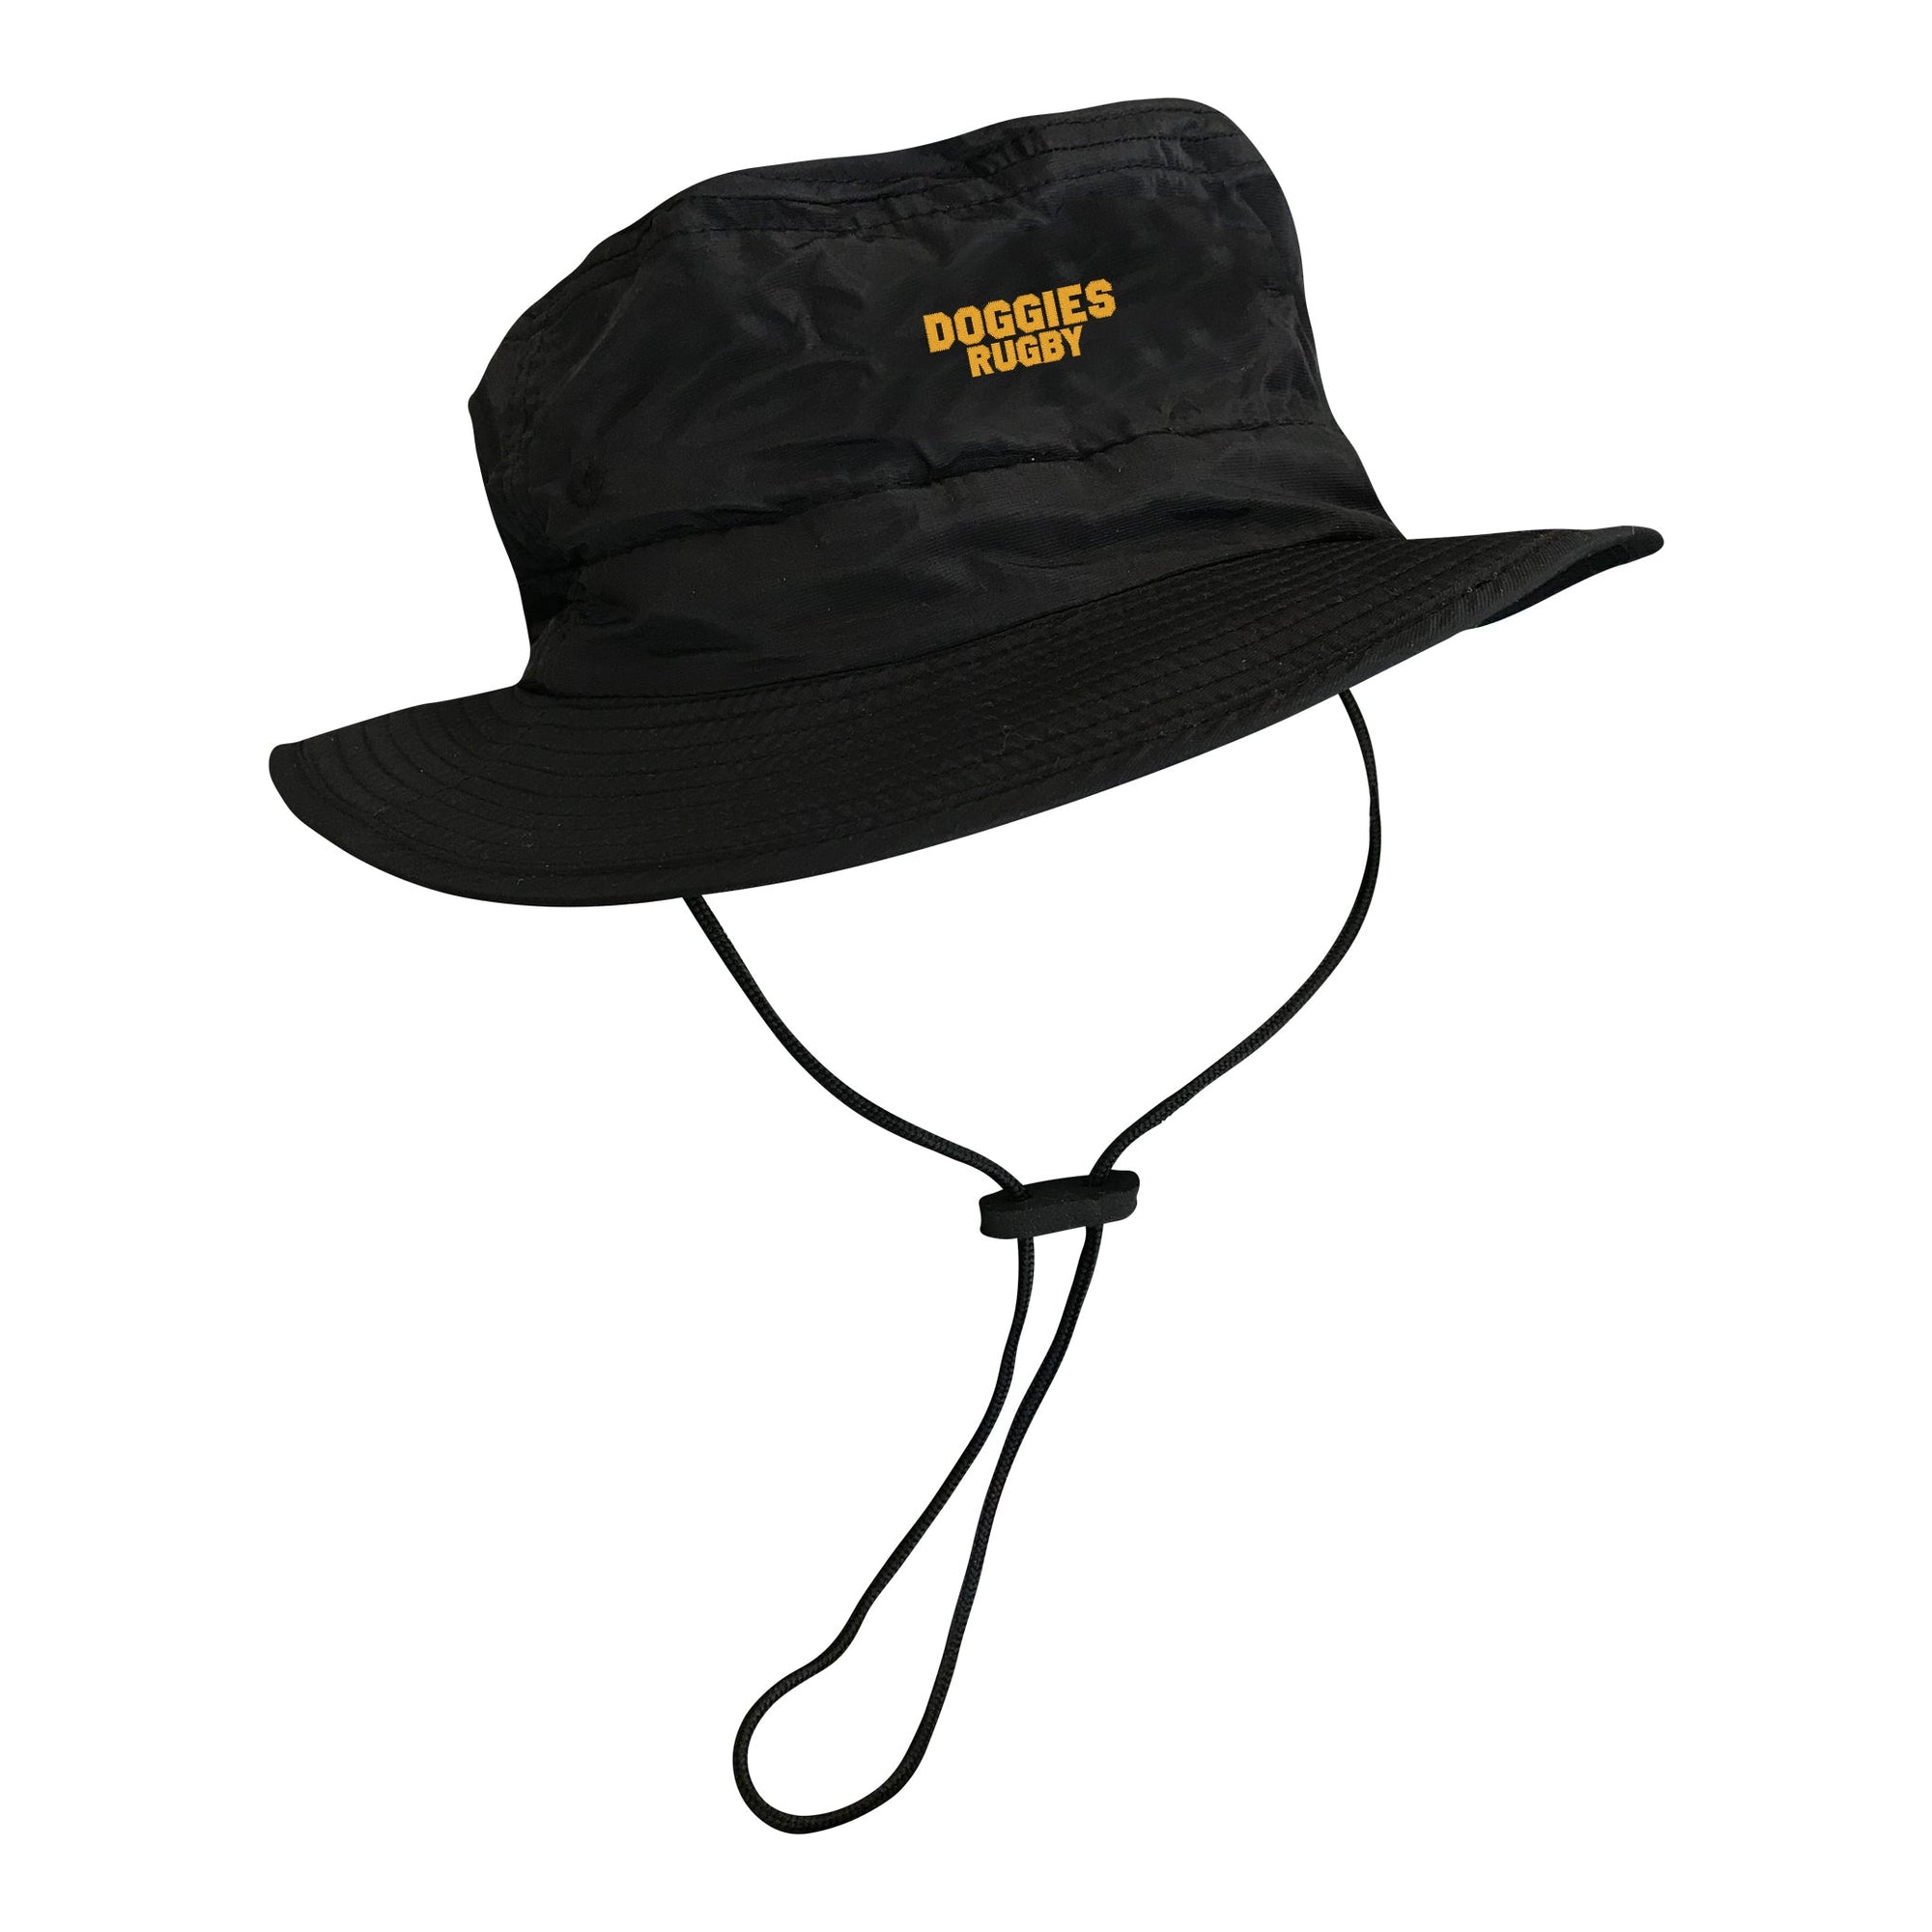 Rugby Imports Brockport Doggies Boonie Hat